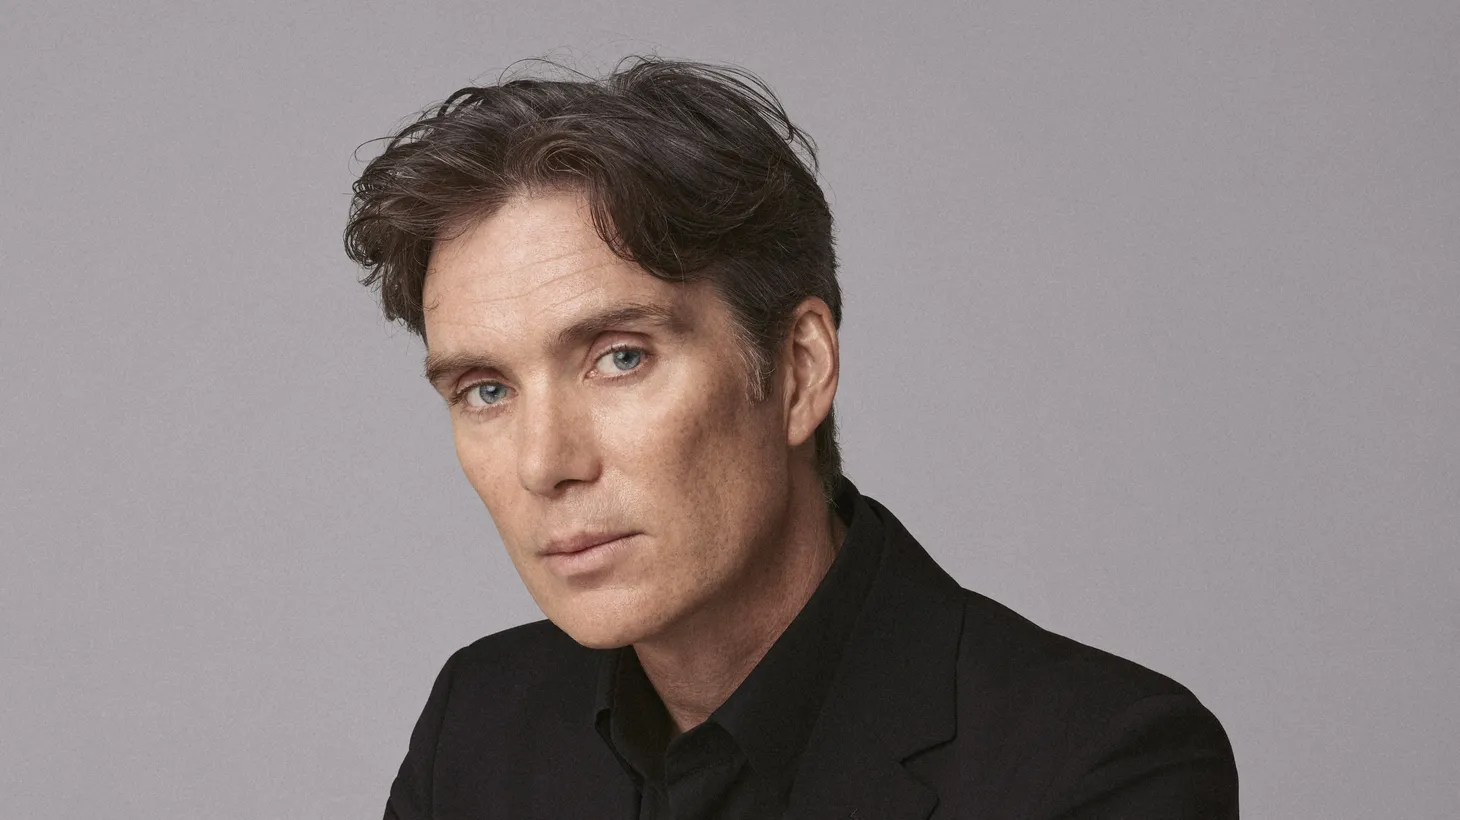 Actor Cillian Murphy shares his love for The Beatles.